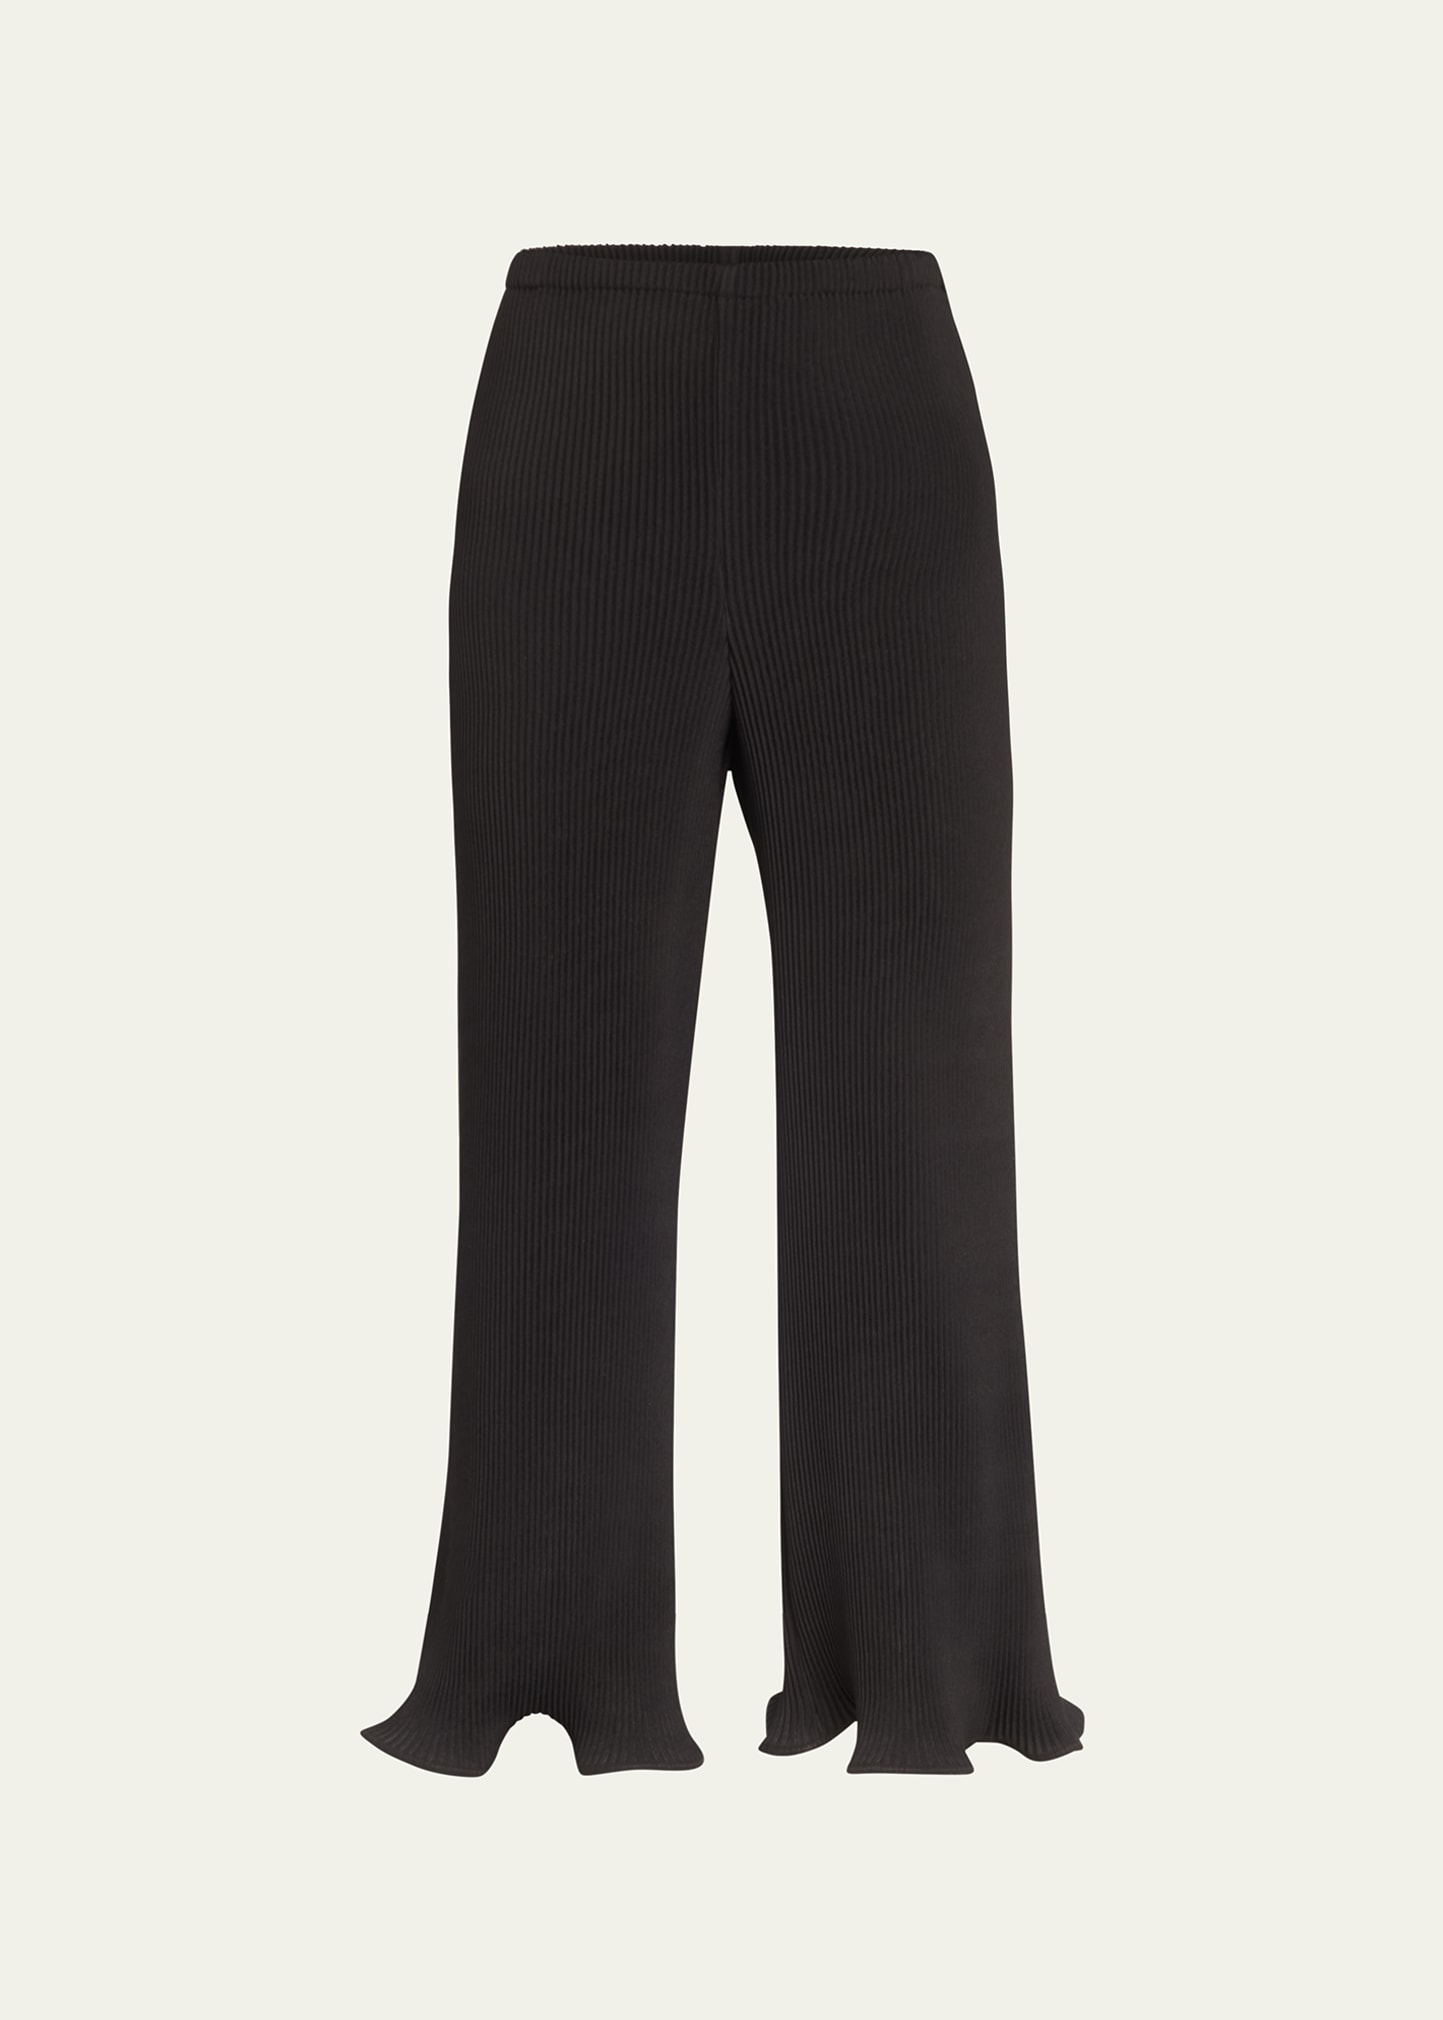 Melitta Baumeister Ripple Ruffle Cropped Pants In Blk